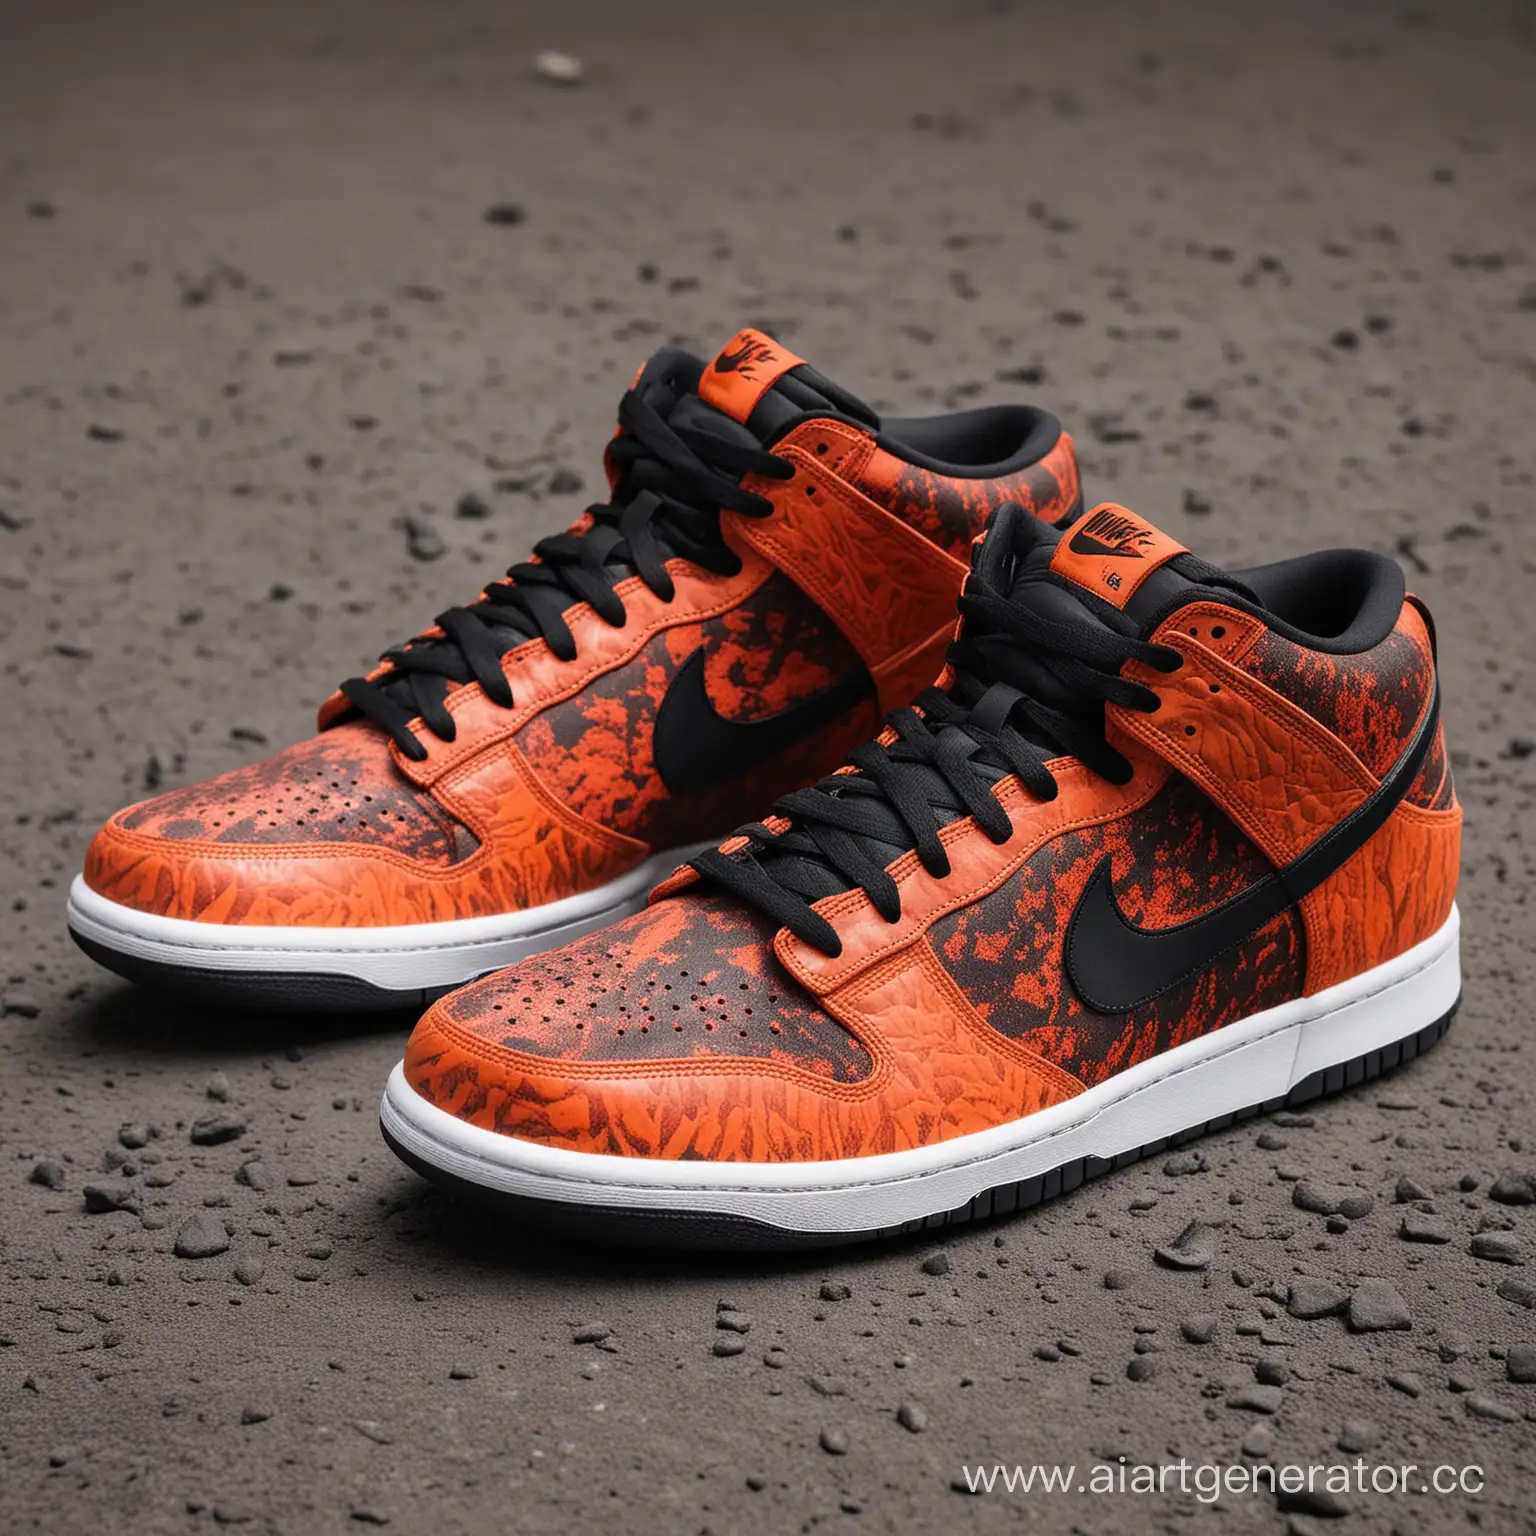 Nike dunk sneakers with volcanic eruption and lava texture pattern